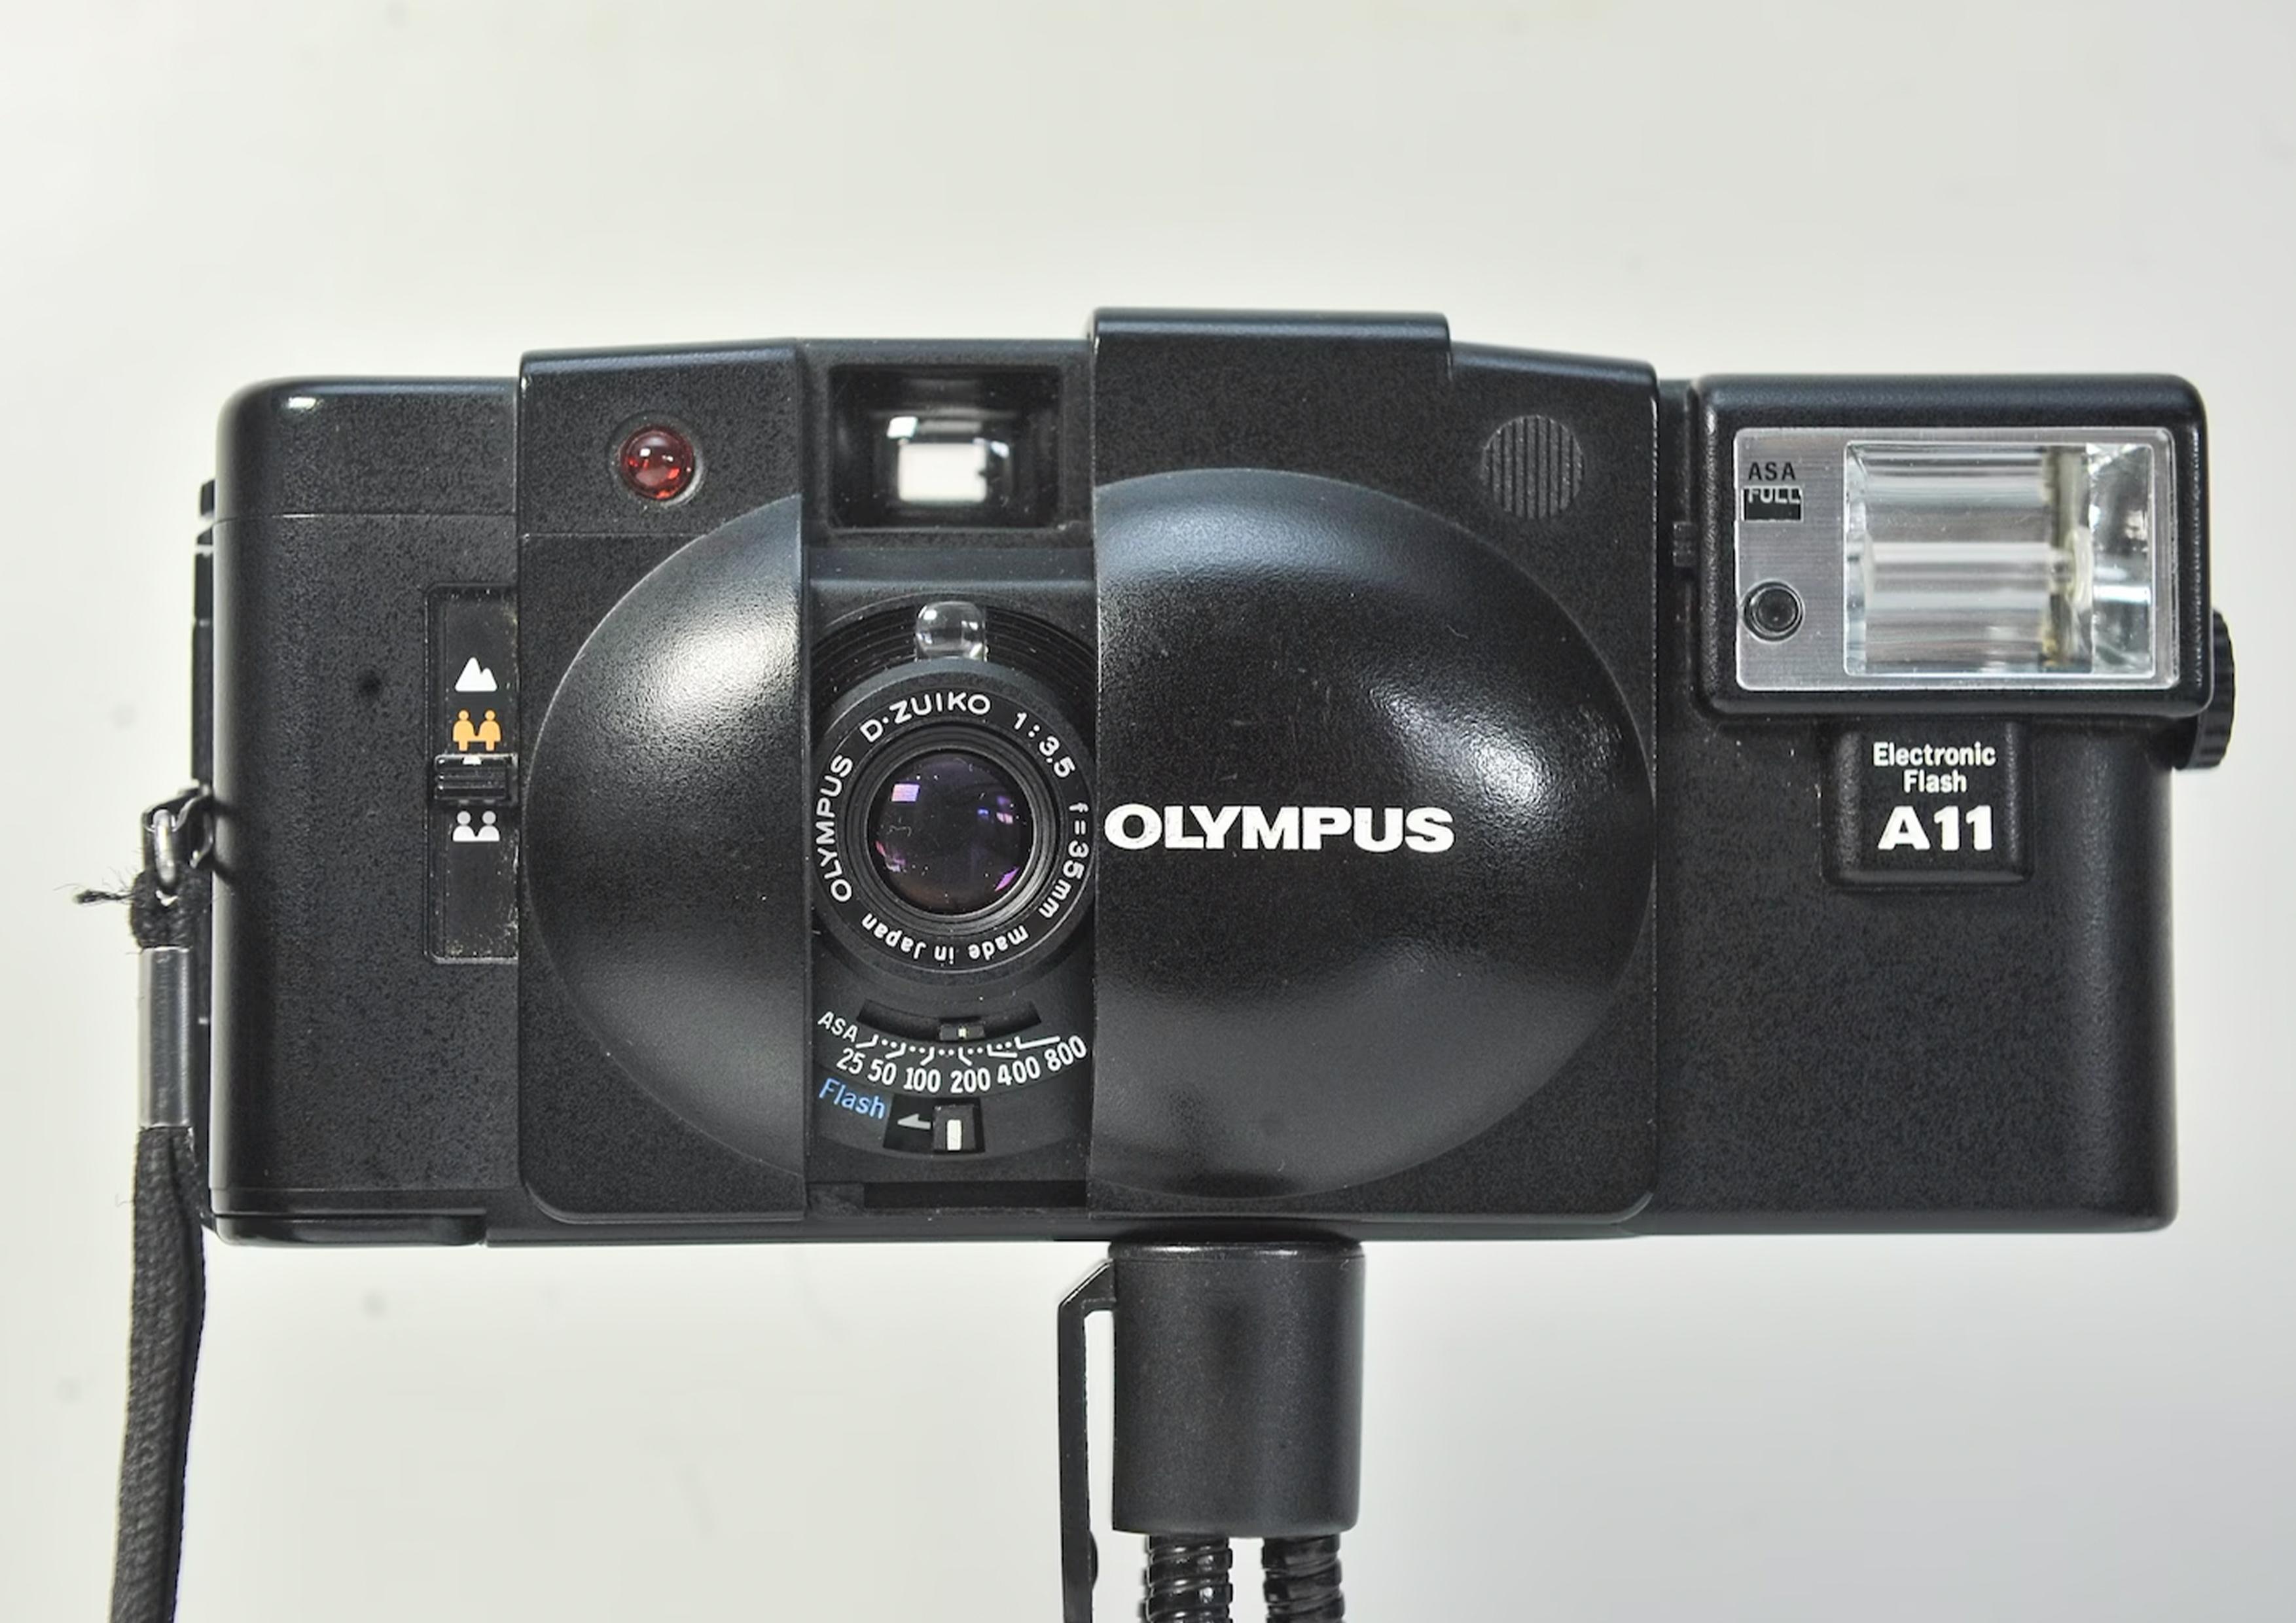 Olympus XA2 35mm Rangefinder Camera and 35mm Olympus Zuiko F3.5 Lens 1980

Great camera for travelling, or street photography with a lovely quiet shutter.

Power source: 2 x LR44 cell batteries

The XA2, introduced in 1980, was a simplified version